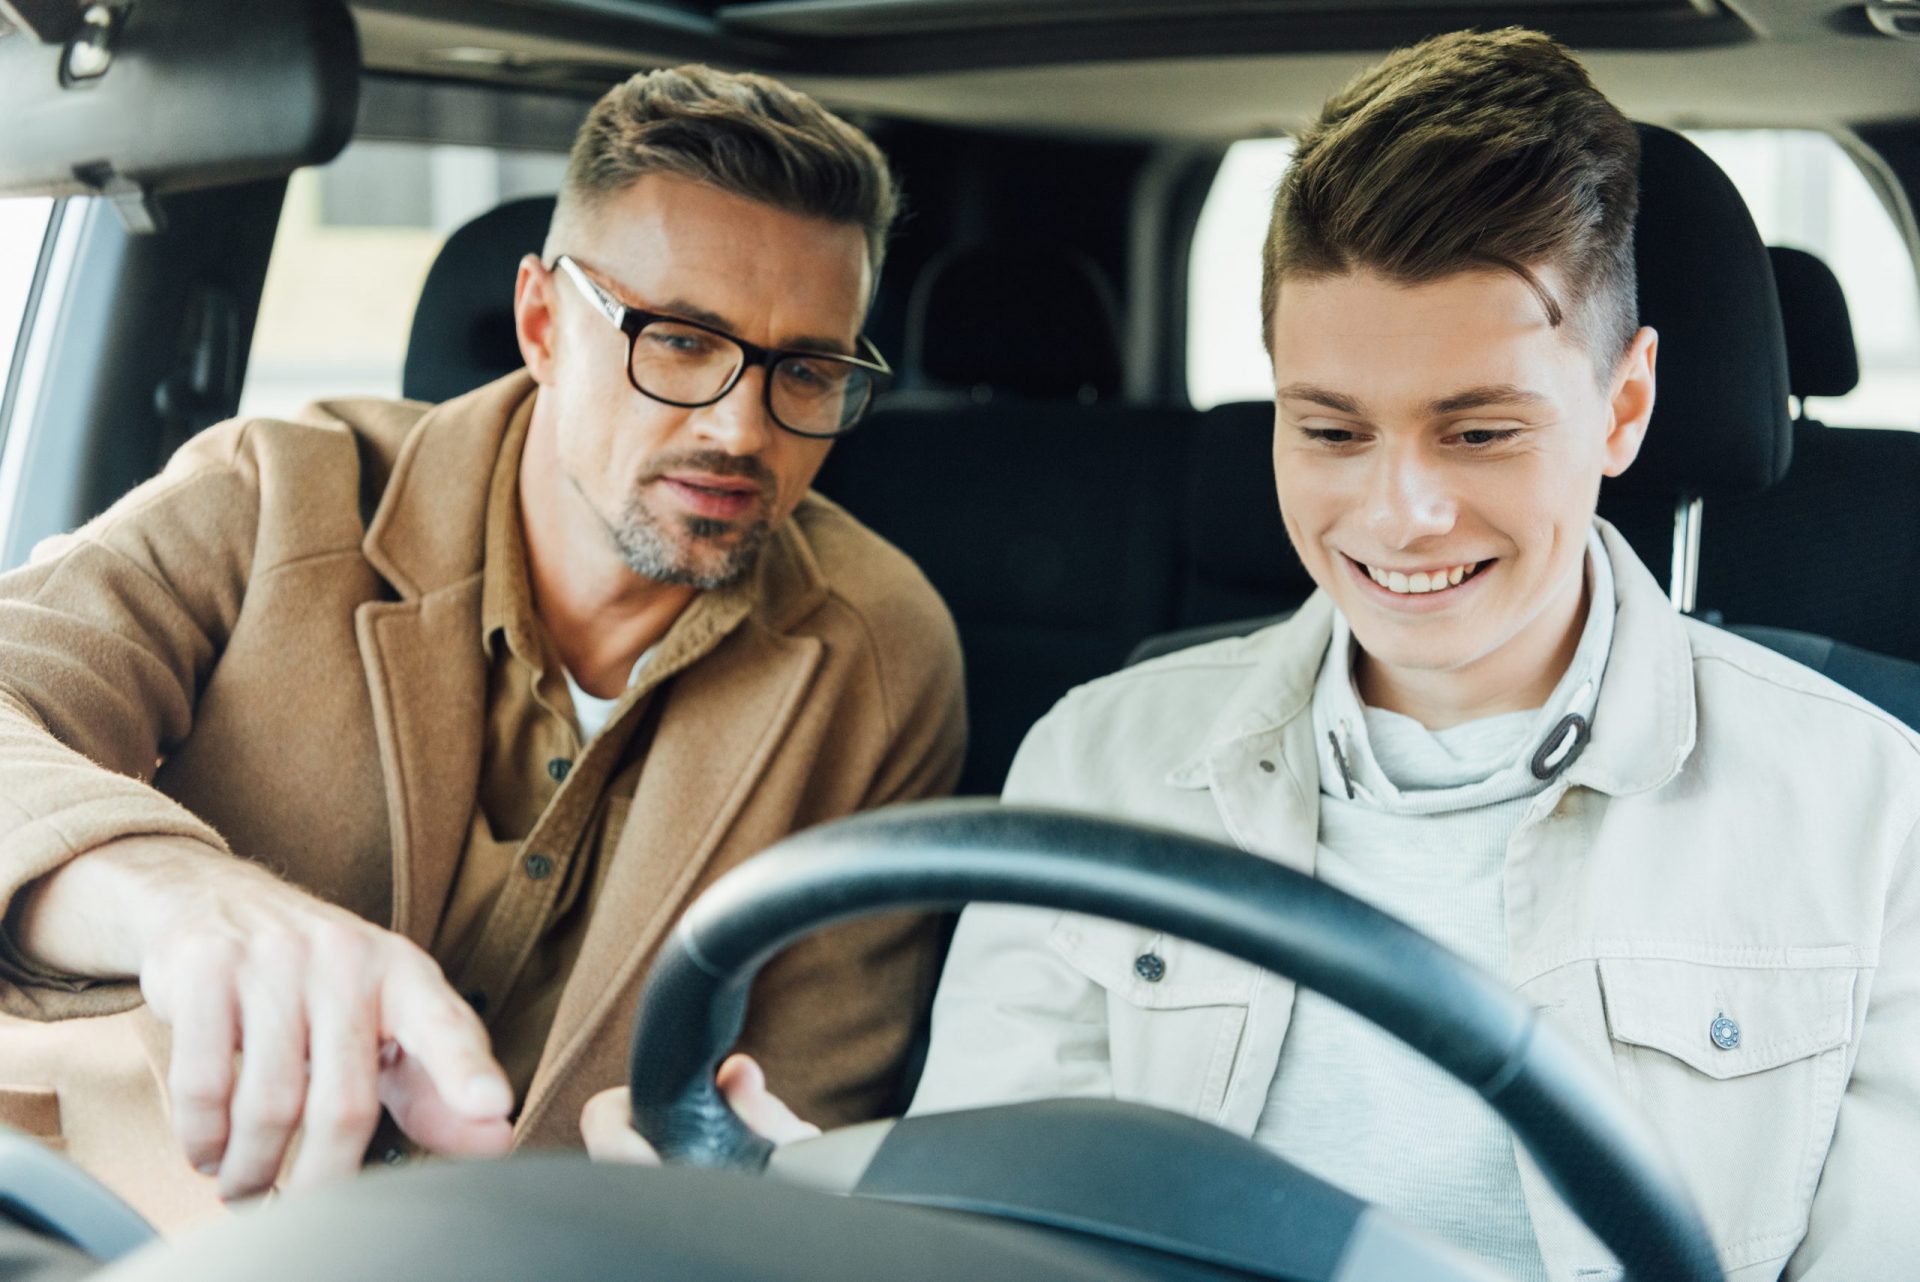 Teen Driving Safety Tips for Families